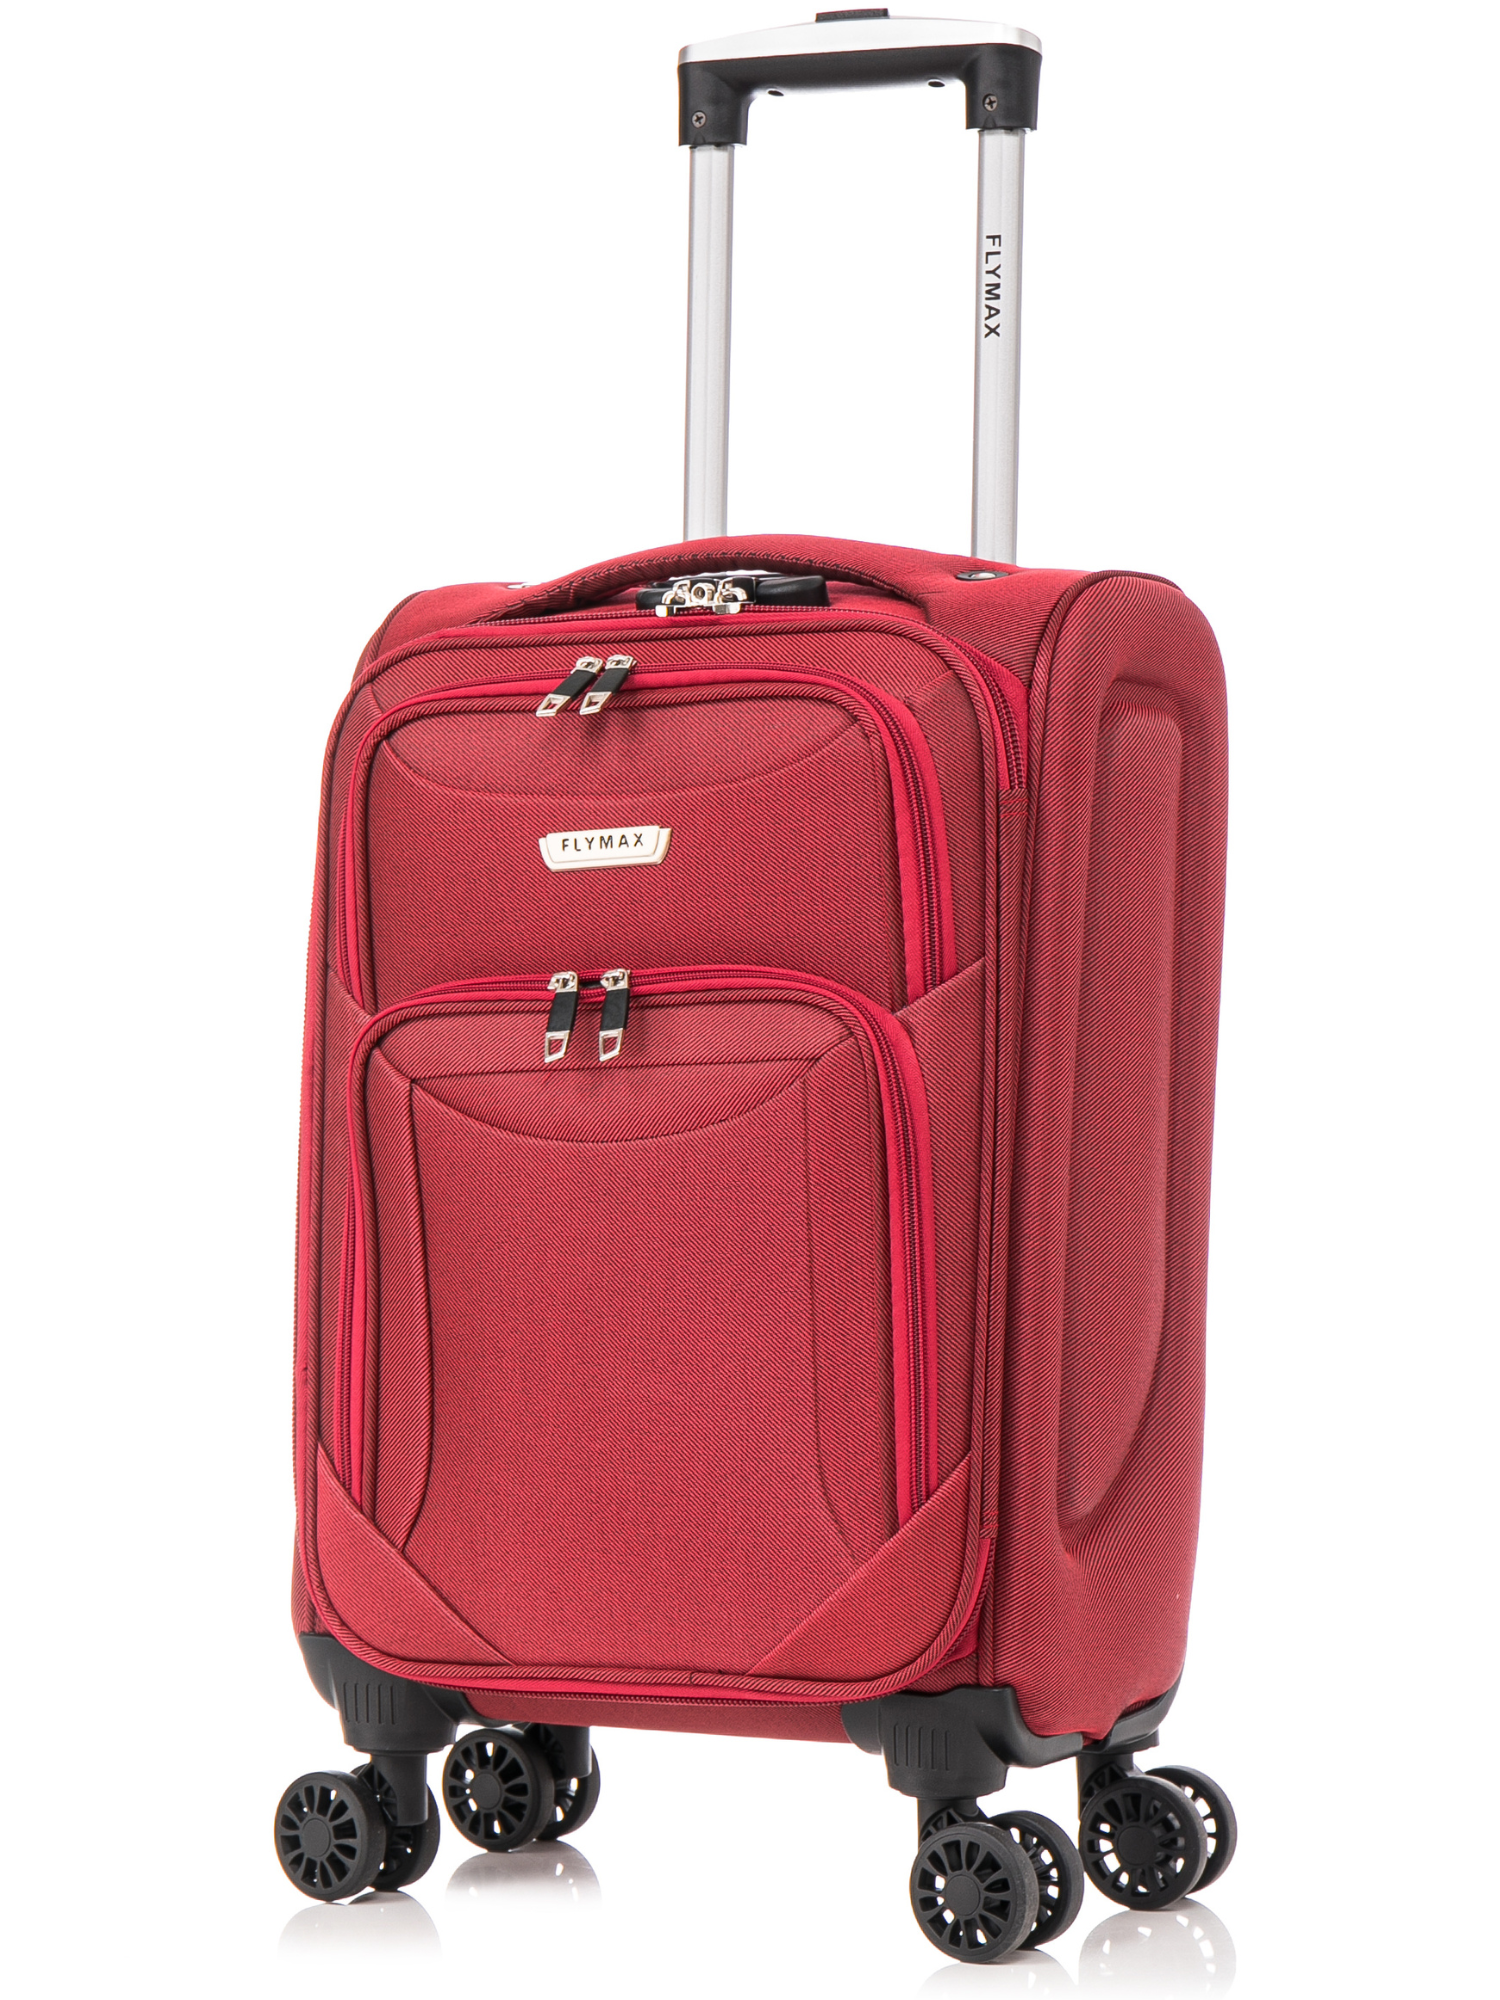 Cabin Carry on Flight Bag Approved Hand Luggage Case Hold Suitcase 55x35x20 Fits Ryanair Easyjet